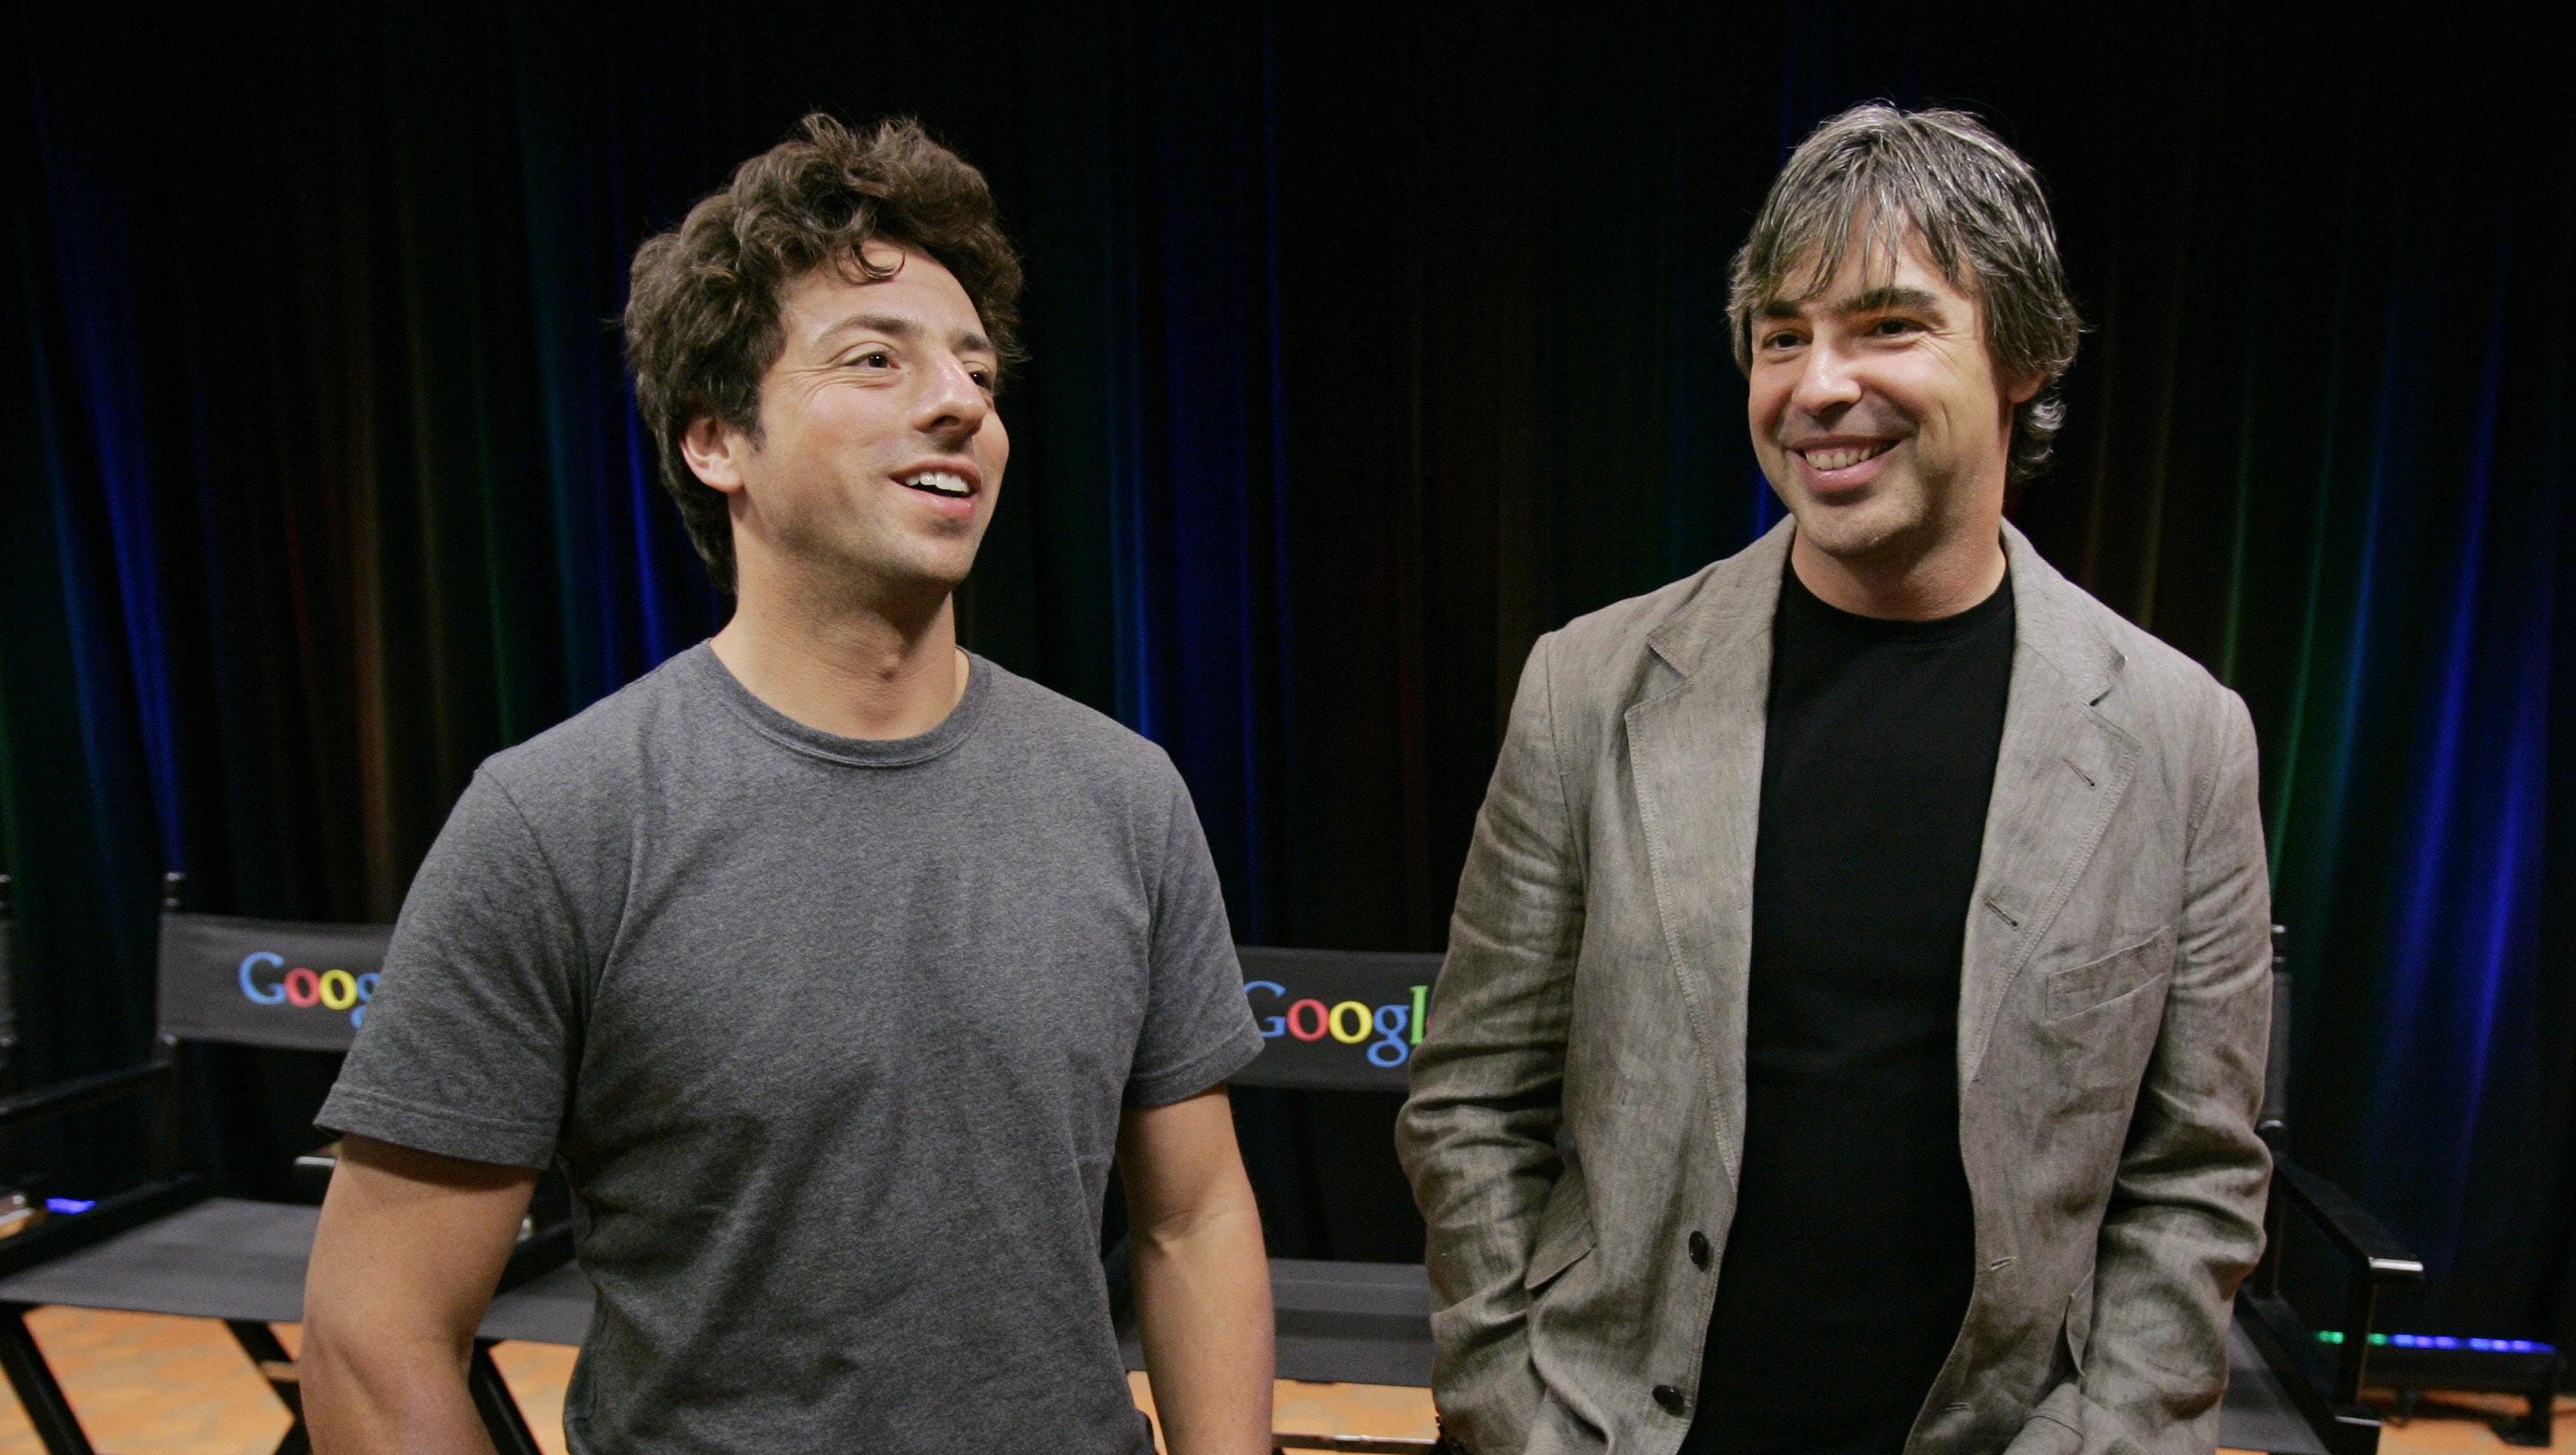 Things have changed a lot even since co-founders Sergey Brin, left, and Larry Page celebrated Google’s 10th anniversary in 2008. Their search engine has morphed into a dominating multi-industry force.